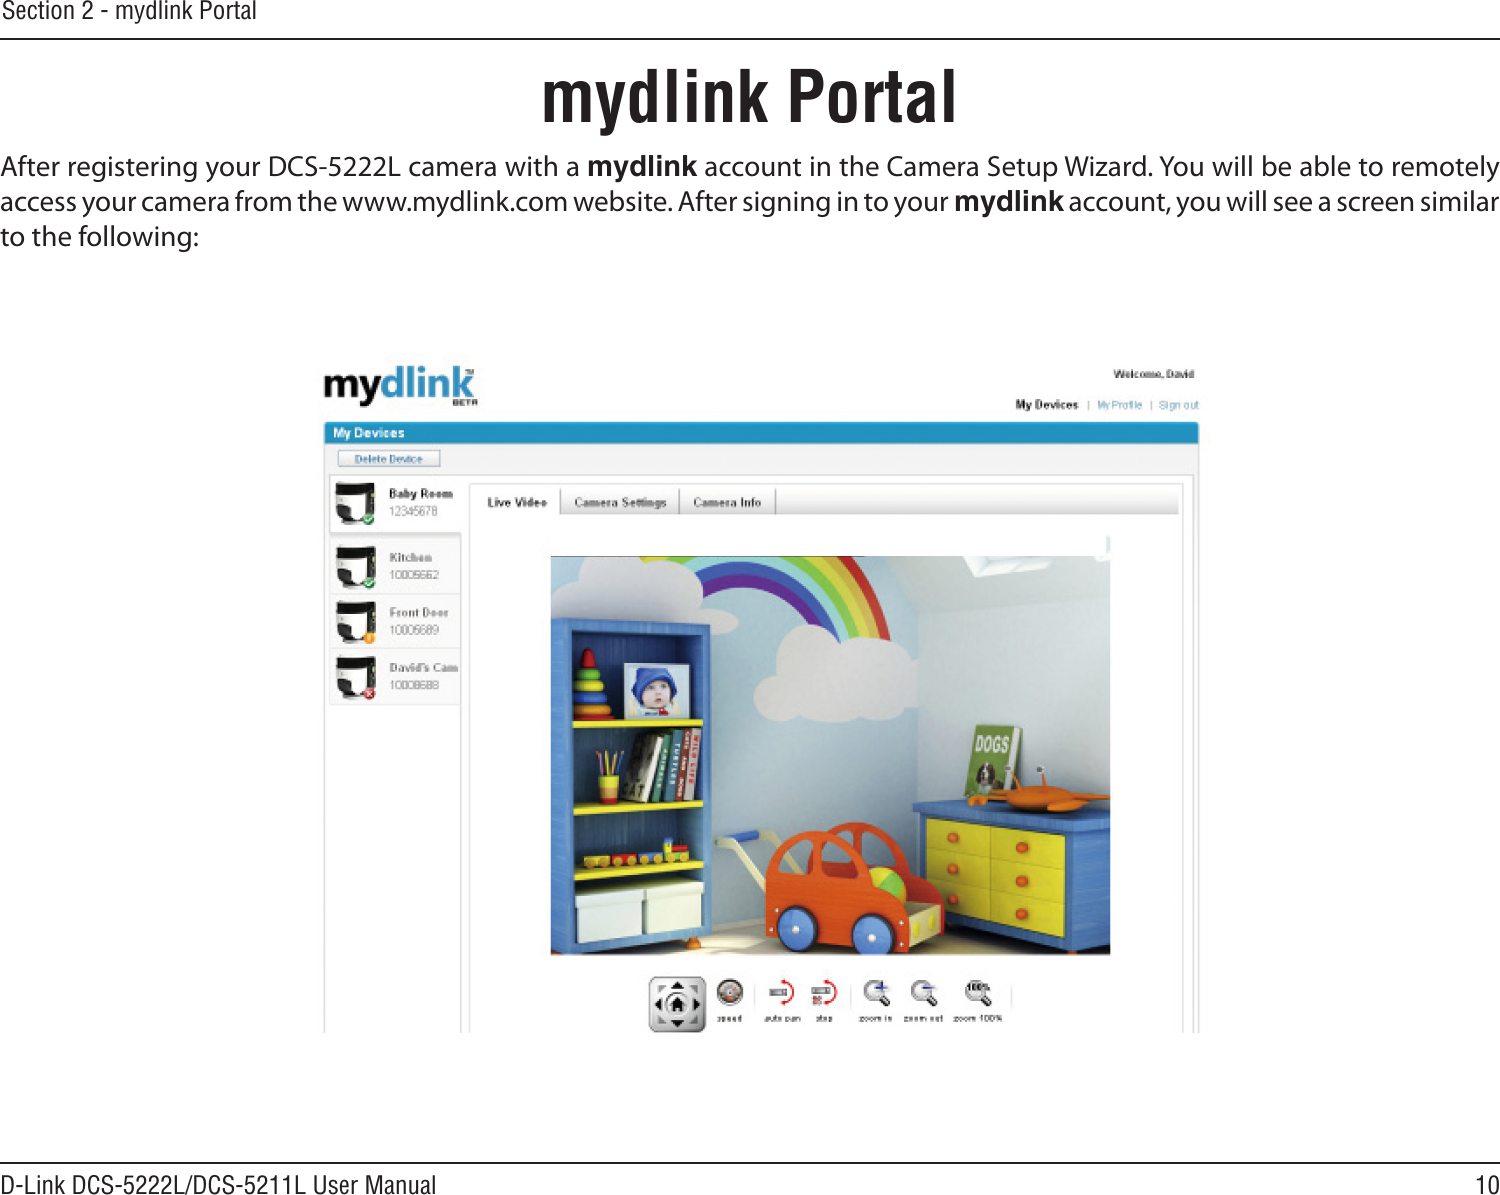 10D-Link DCS-5222L/DCS-5211L User ManualSection 2 - mydlink Portalmydlink PortalAfter registering your DCS-5222L camera with a mydlink account in the Camera Setup Wizard. You will be able to remotely access your camera from the www.mydlink.com website. After signing in to your mydlink account, you will see a screen similar to the following: